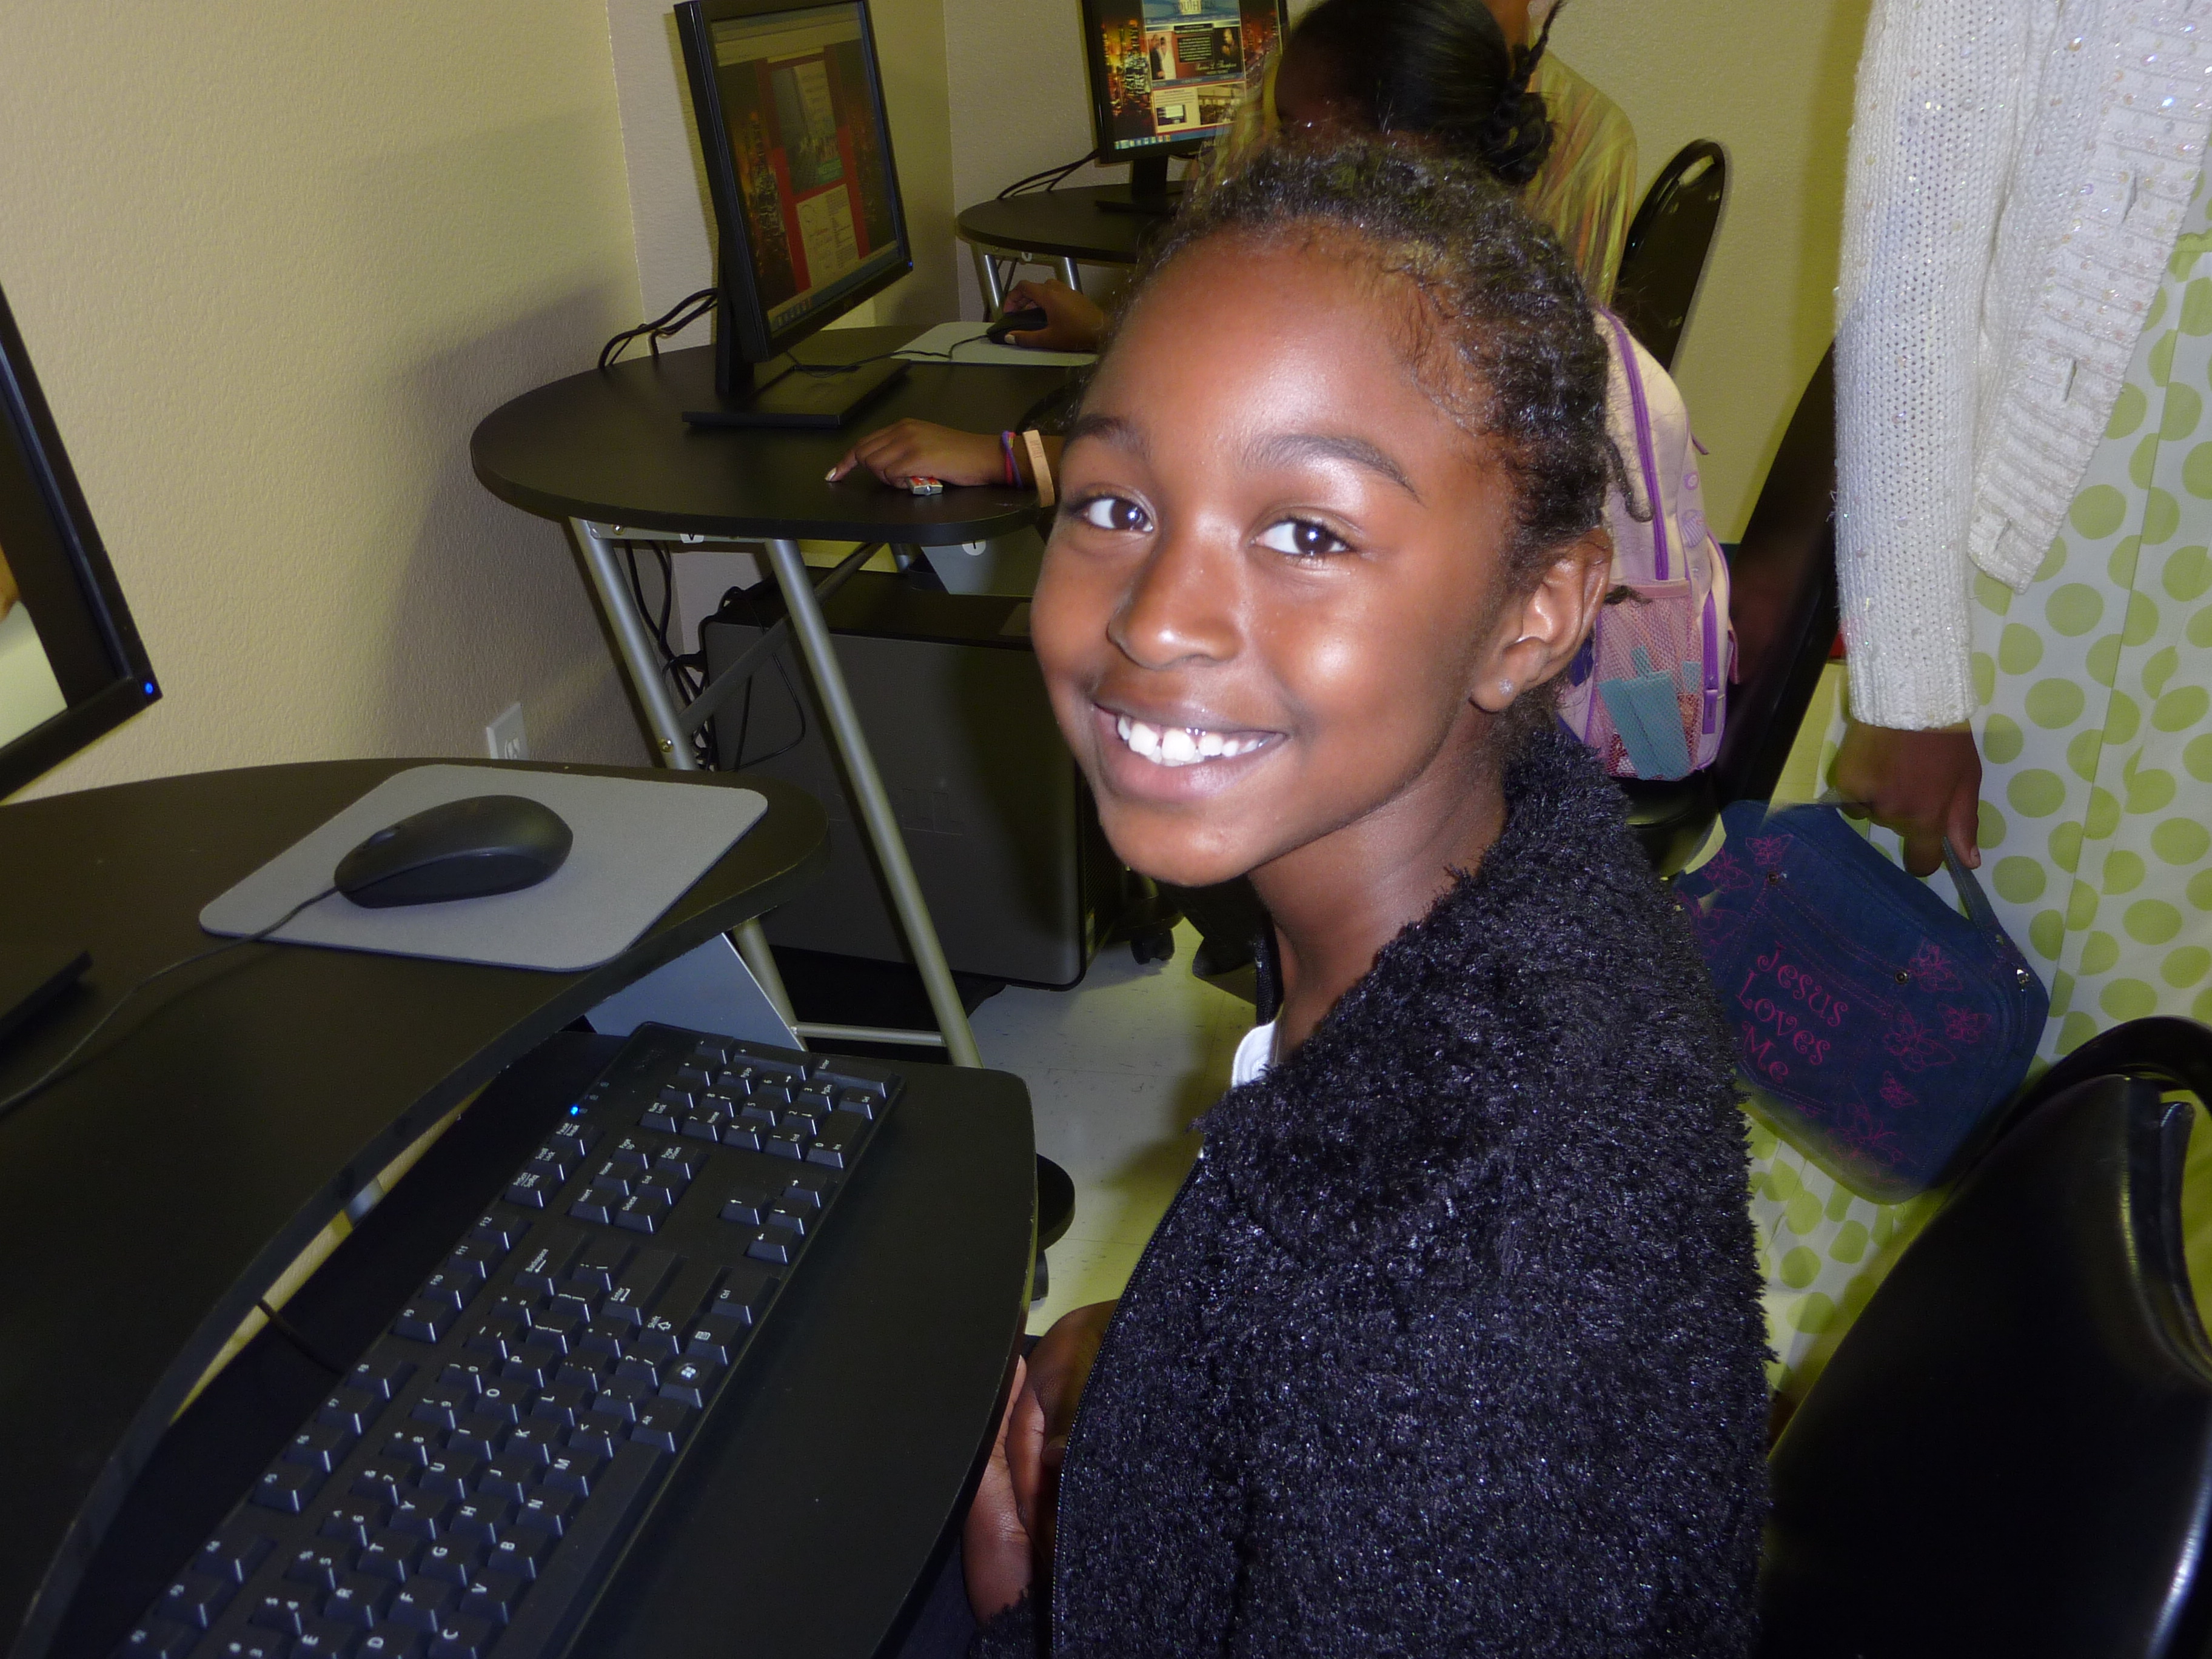 Girl at Computer training with a huge smile